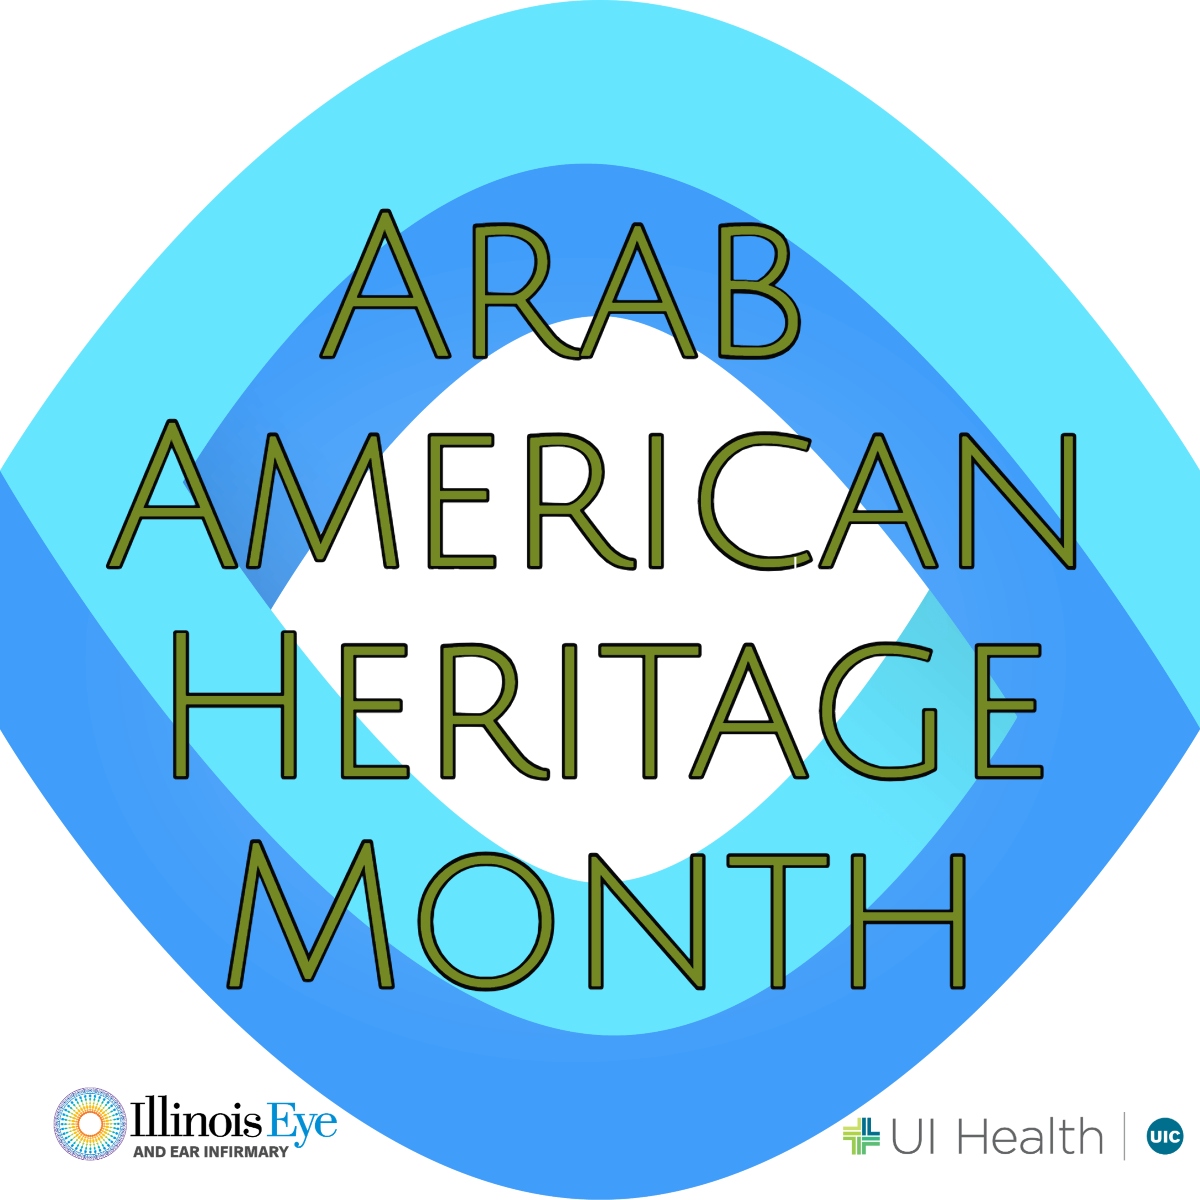 April is recognized nationally as Arab American Heritage month, celebrating the heritage, culture and contributions of Arab Americans across the country. We are pleased to recognize and thank our many Arab American colleagues for their contributions, which enrich our Department.